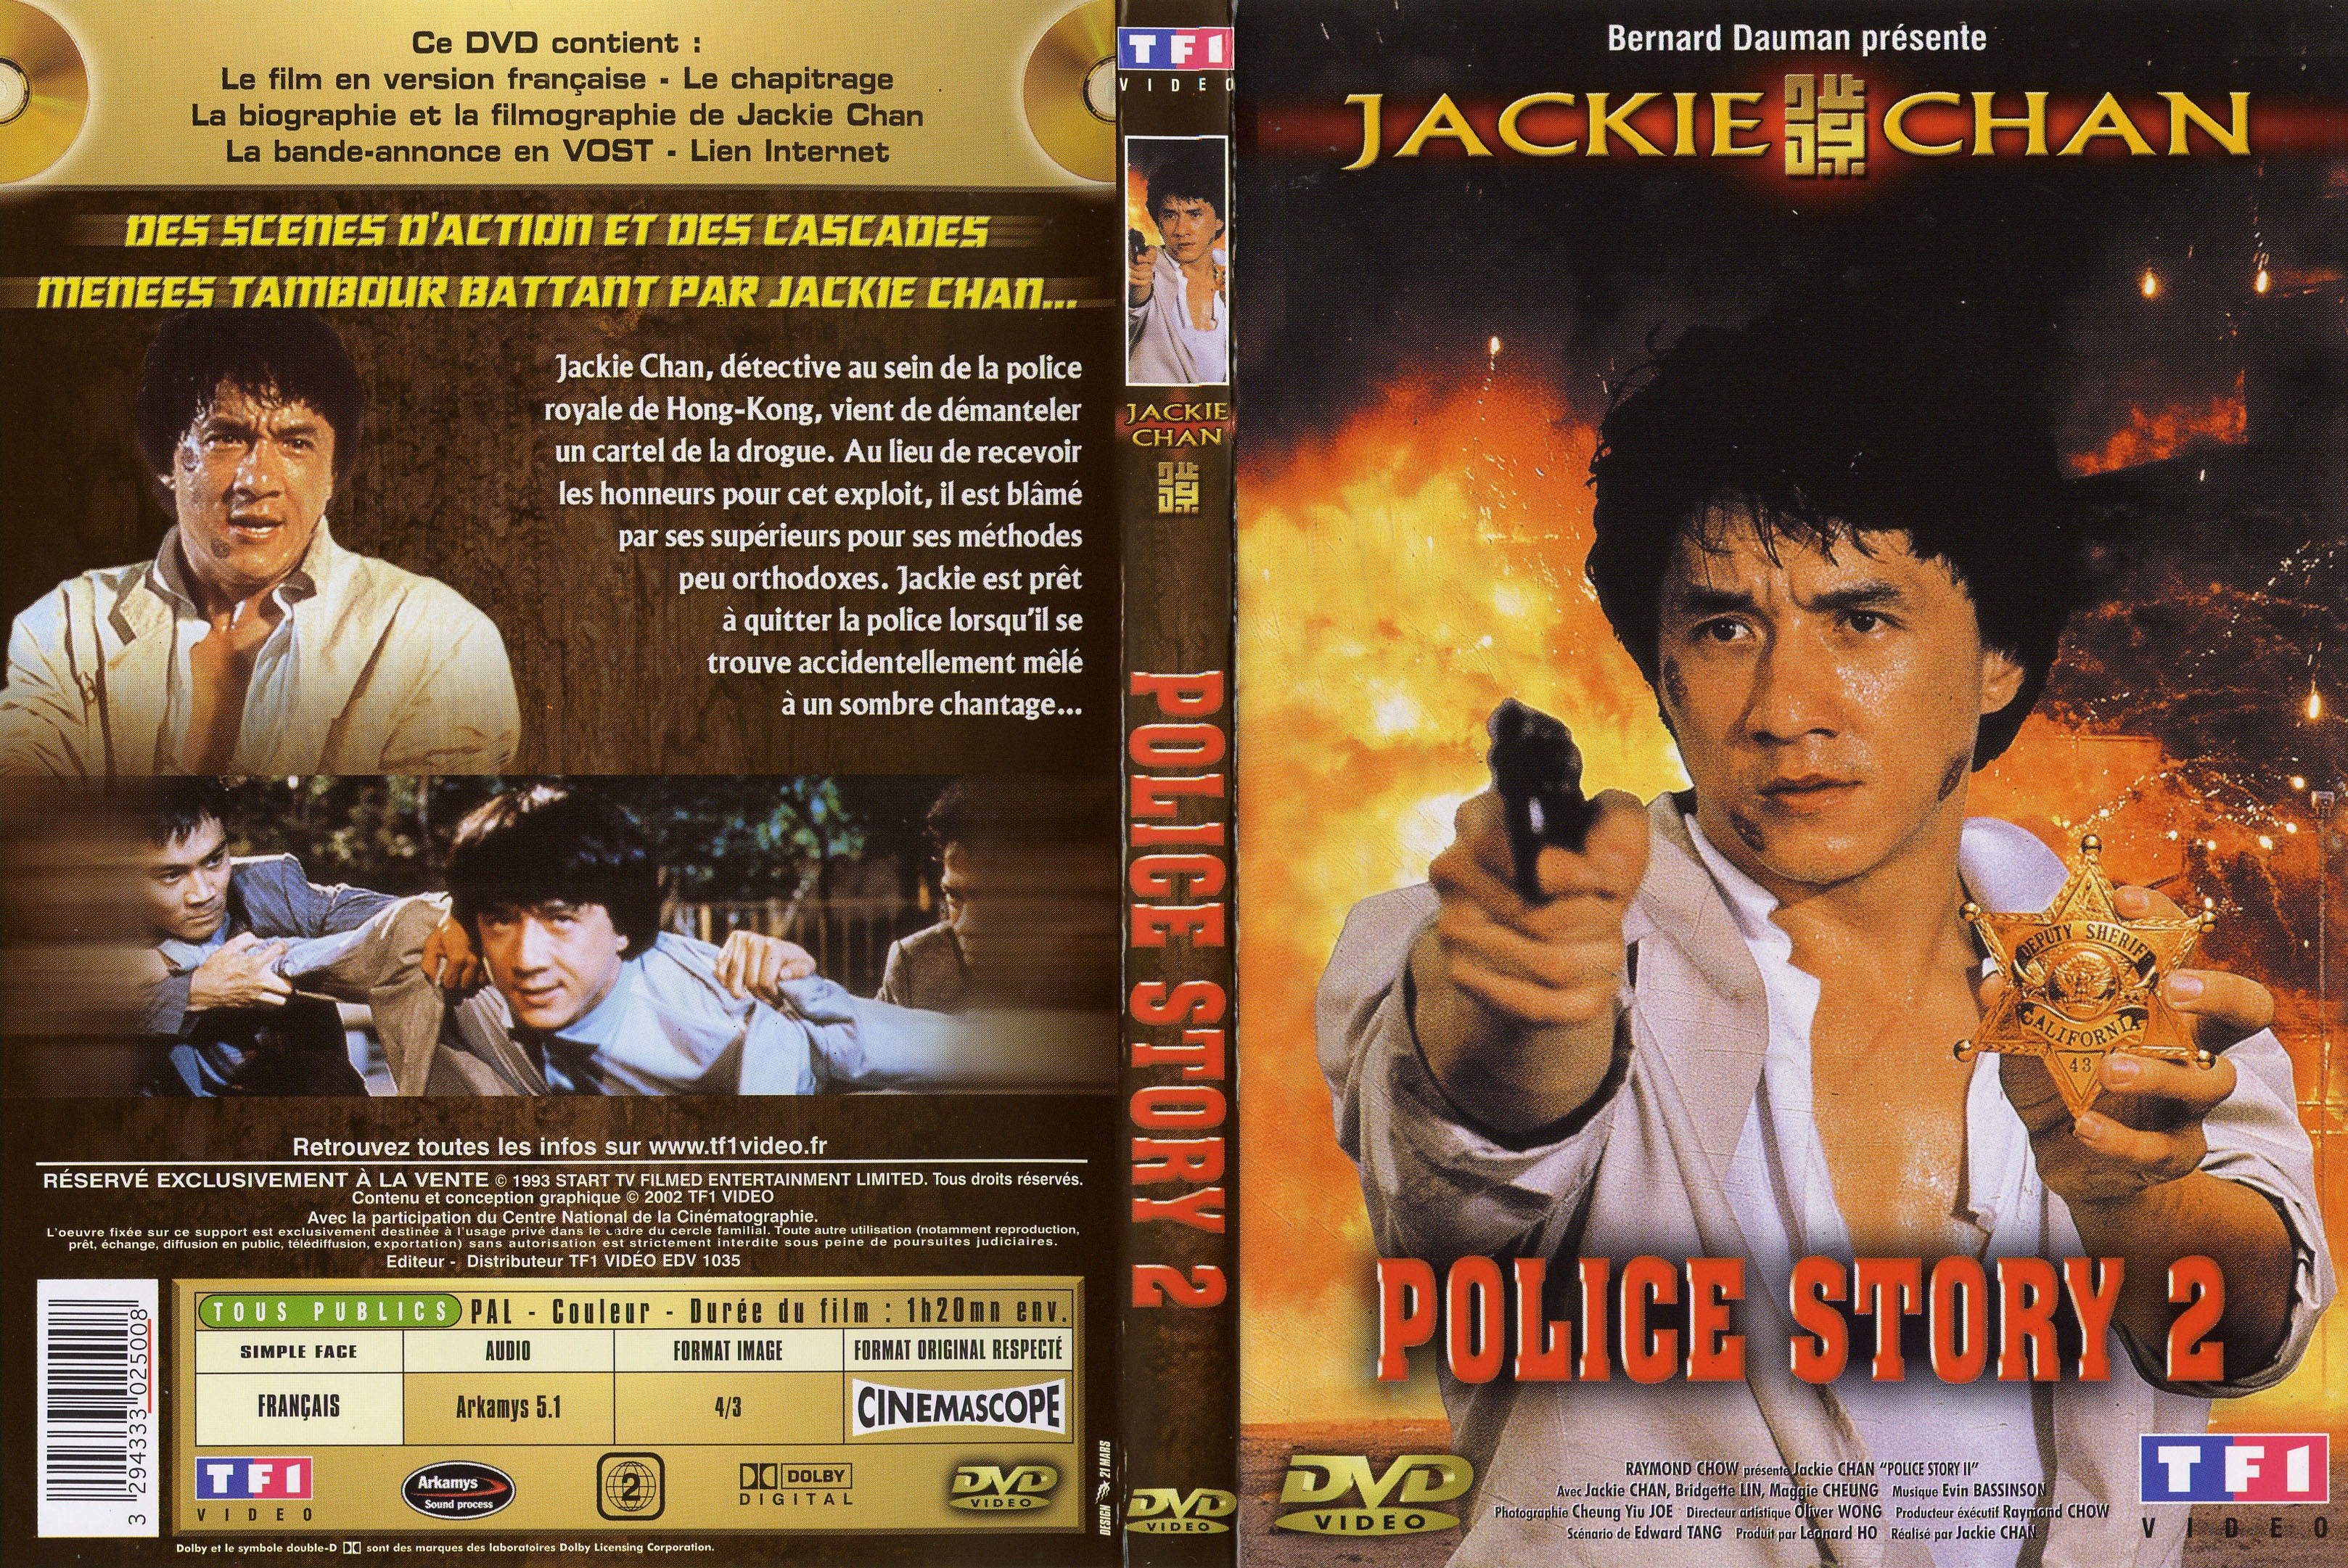 Jaquette DVD Police story 2